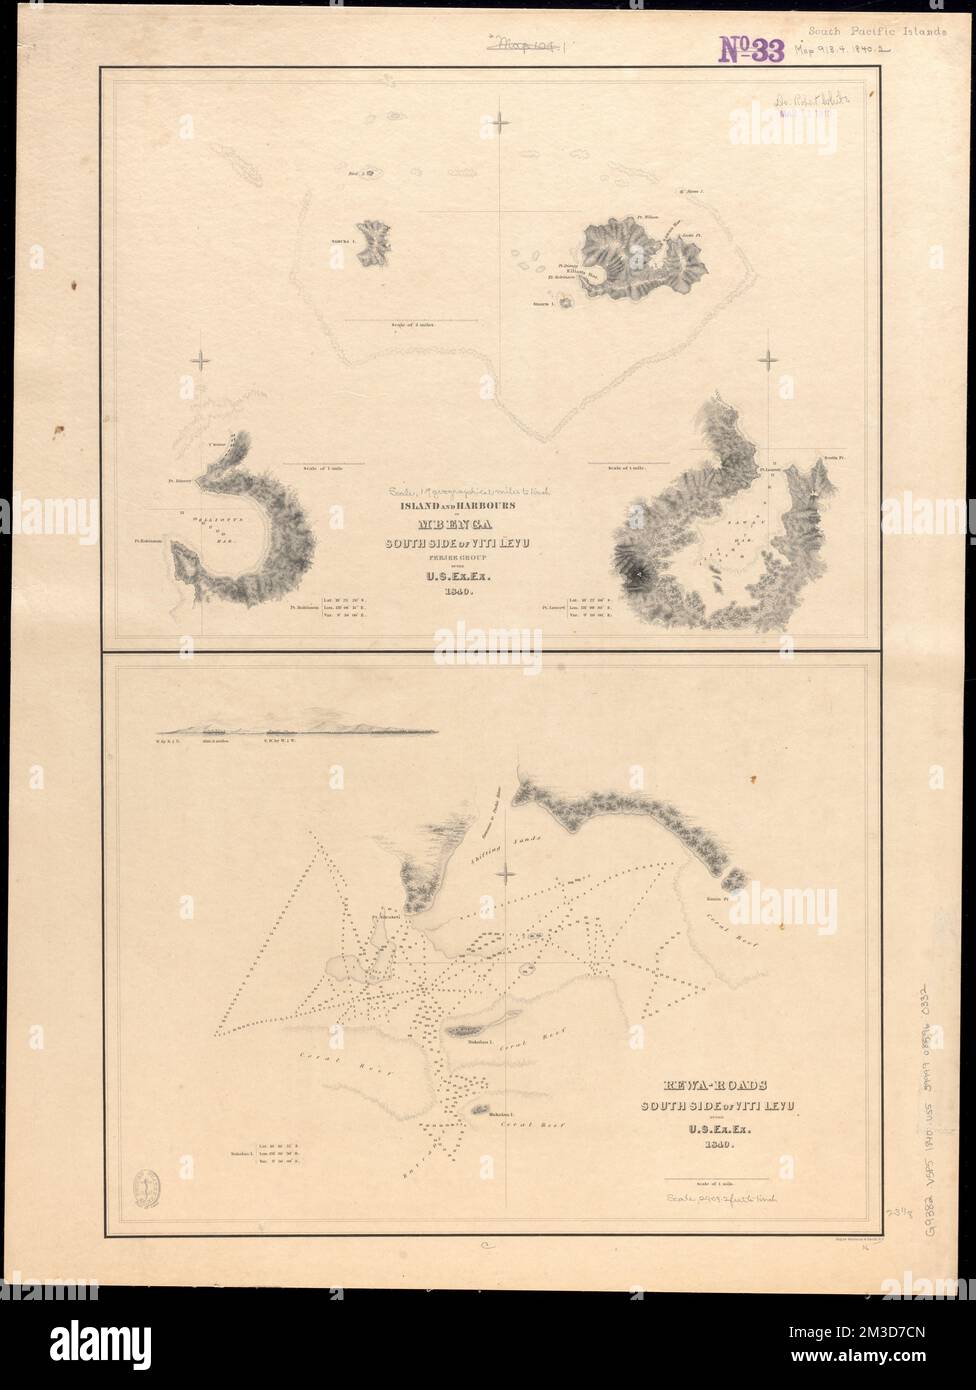 Island and harbours of Mbenga, south side of Viti Levu, Feejee Group ; Rewa-Roads, south side of Viti Levu , Mbengga Fiji, Maps, Viti Levu Fiji, Maps, Nautical charts, Fiji, Mbengga, Nautical charts, Fiji, Viti Levu Norman B. Leventhal Map Center Collection Stock Photo